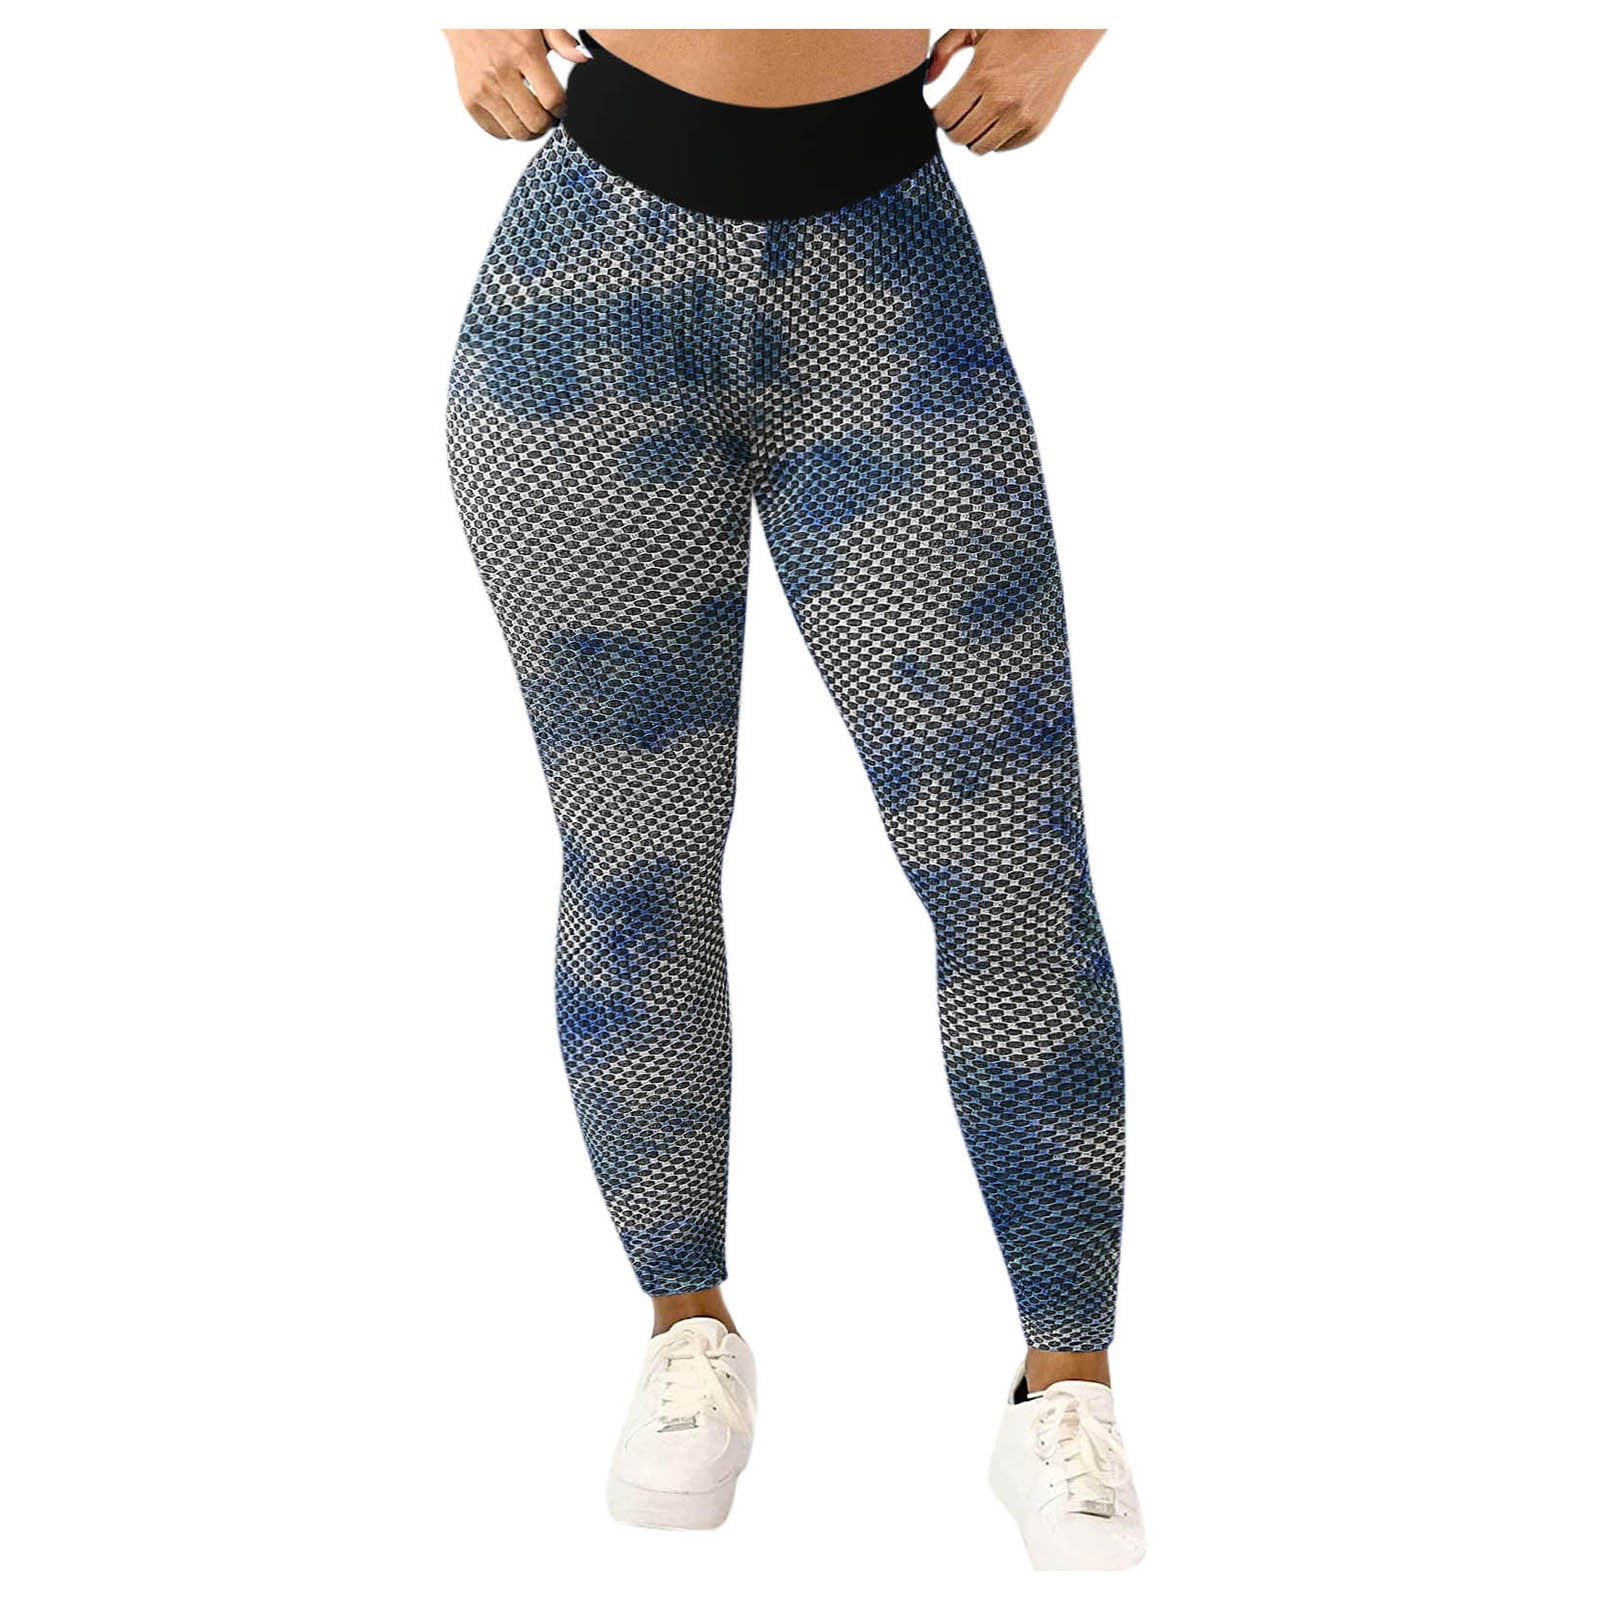 LEEy-World Workout Leggings for Women Seamless Scrunch Lifting Leggings  High Waisted Yoga Pants for Women, Workout Tight Multicolor,XL